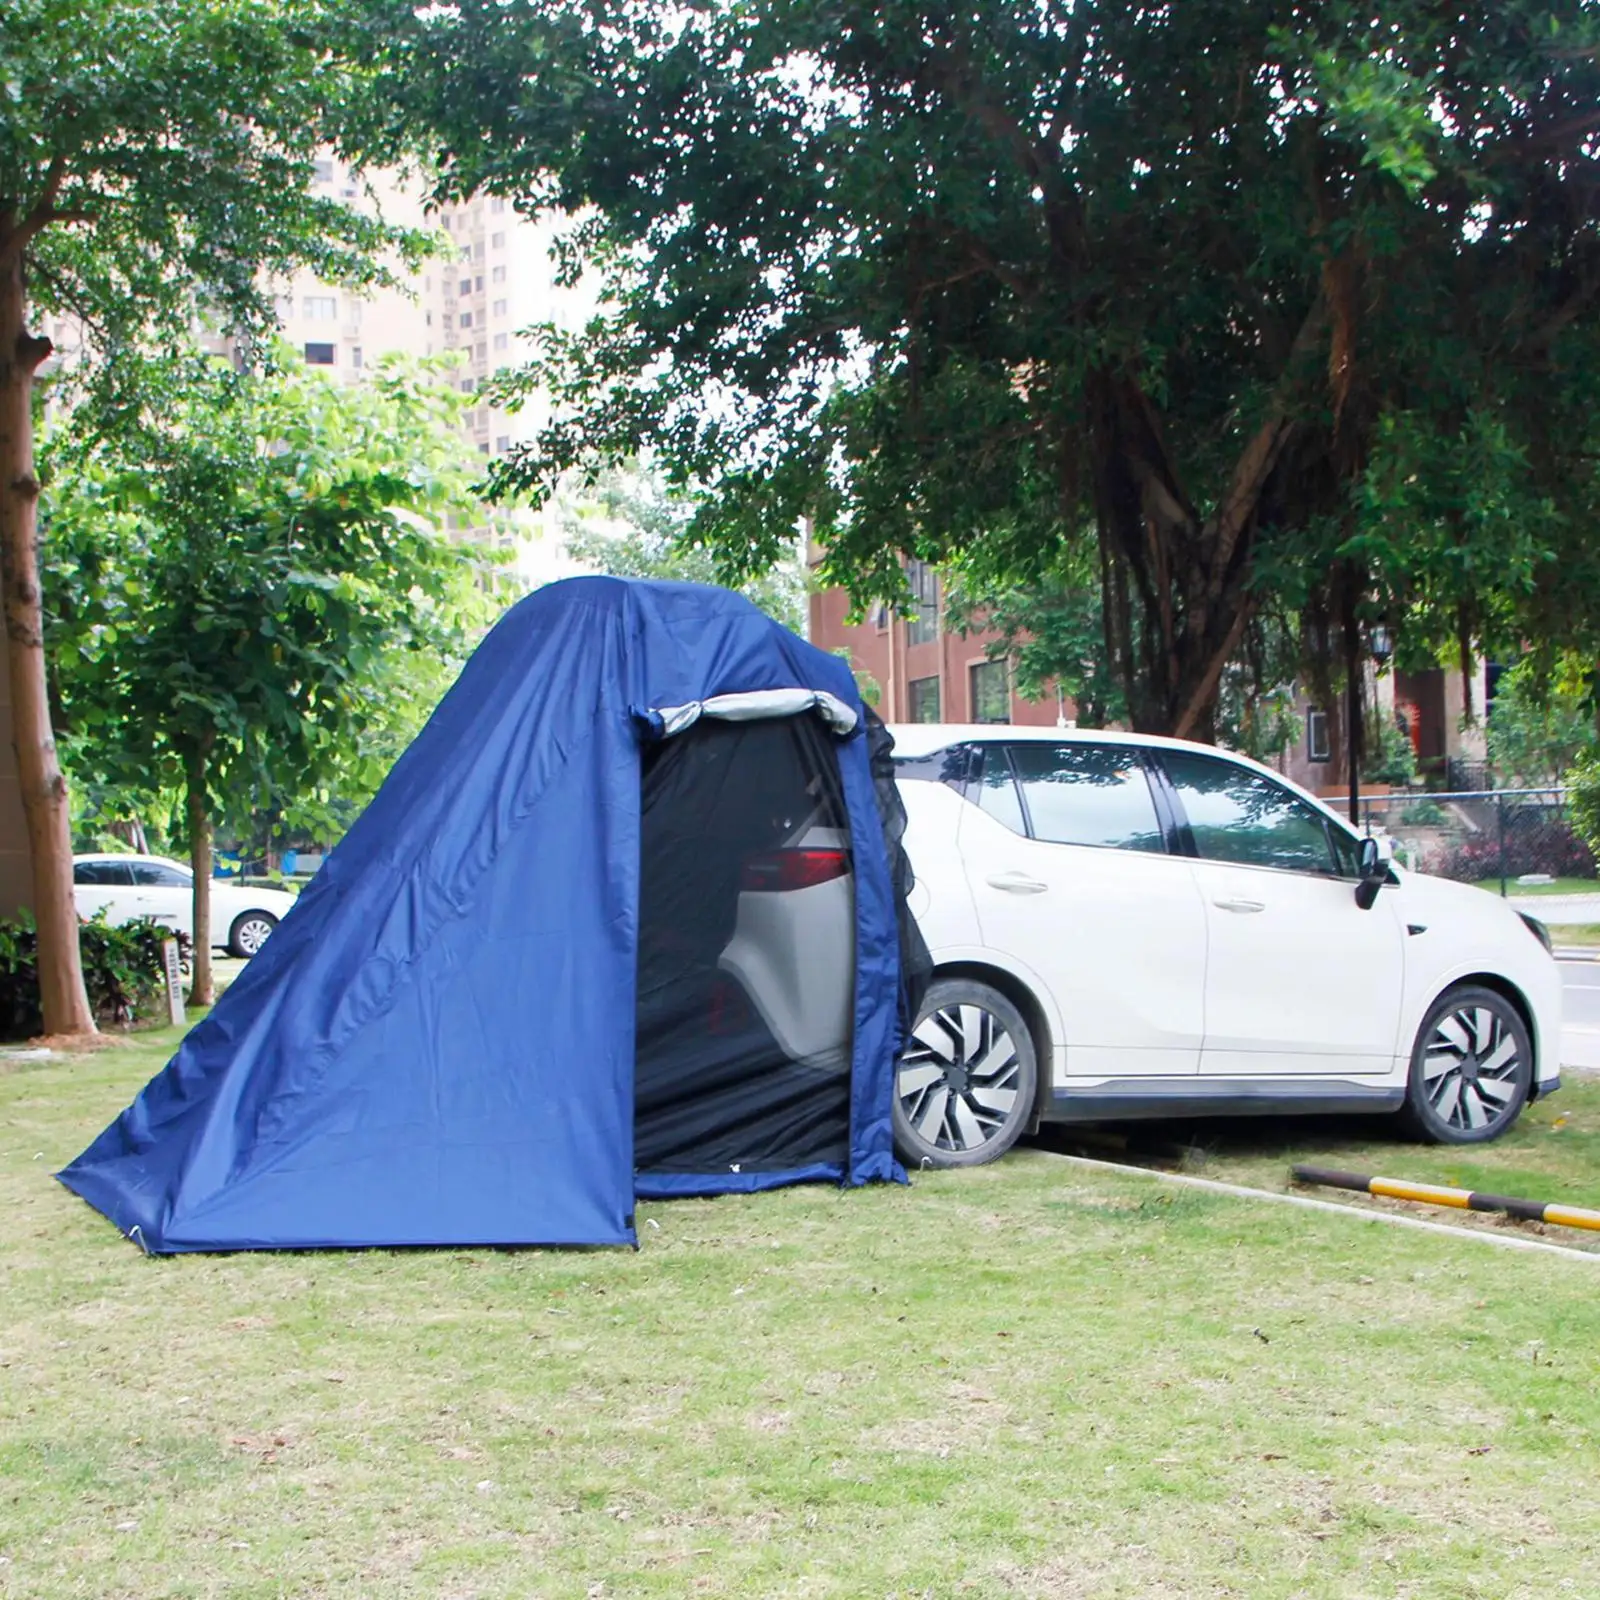 Portable Car Rear Tent Extension Waterproof Car Trunk Tent Vehicle Rear Canopy Beach for Outdoor Camping Self-driving Tour BBQ